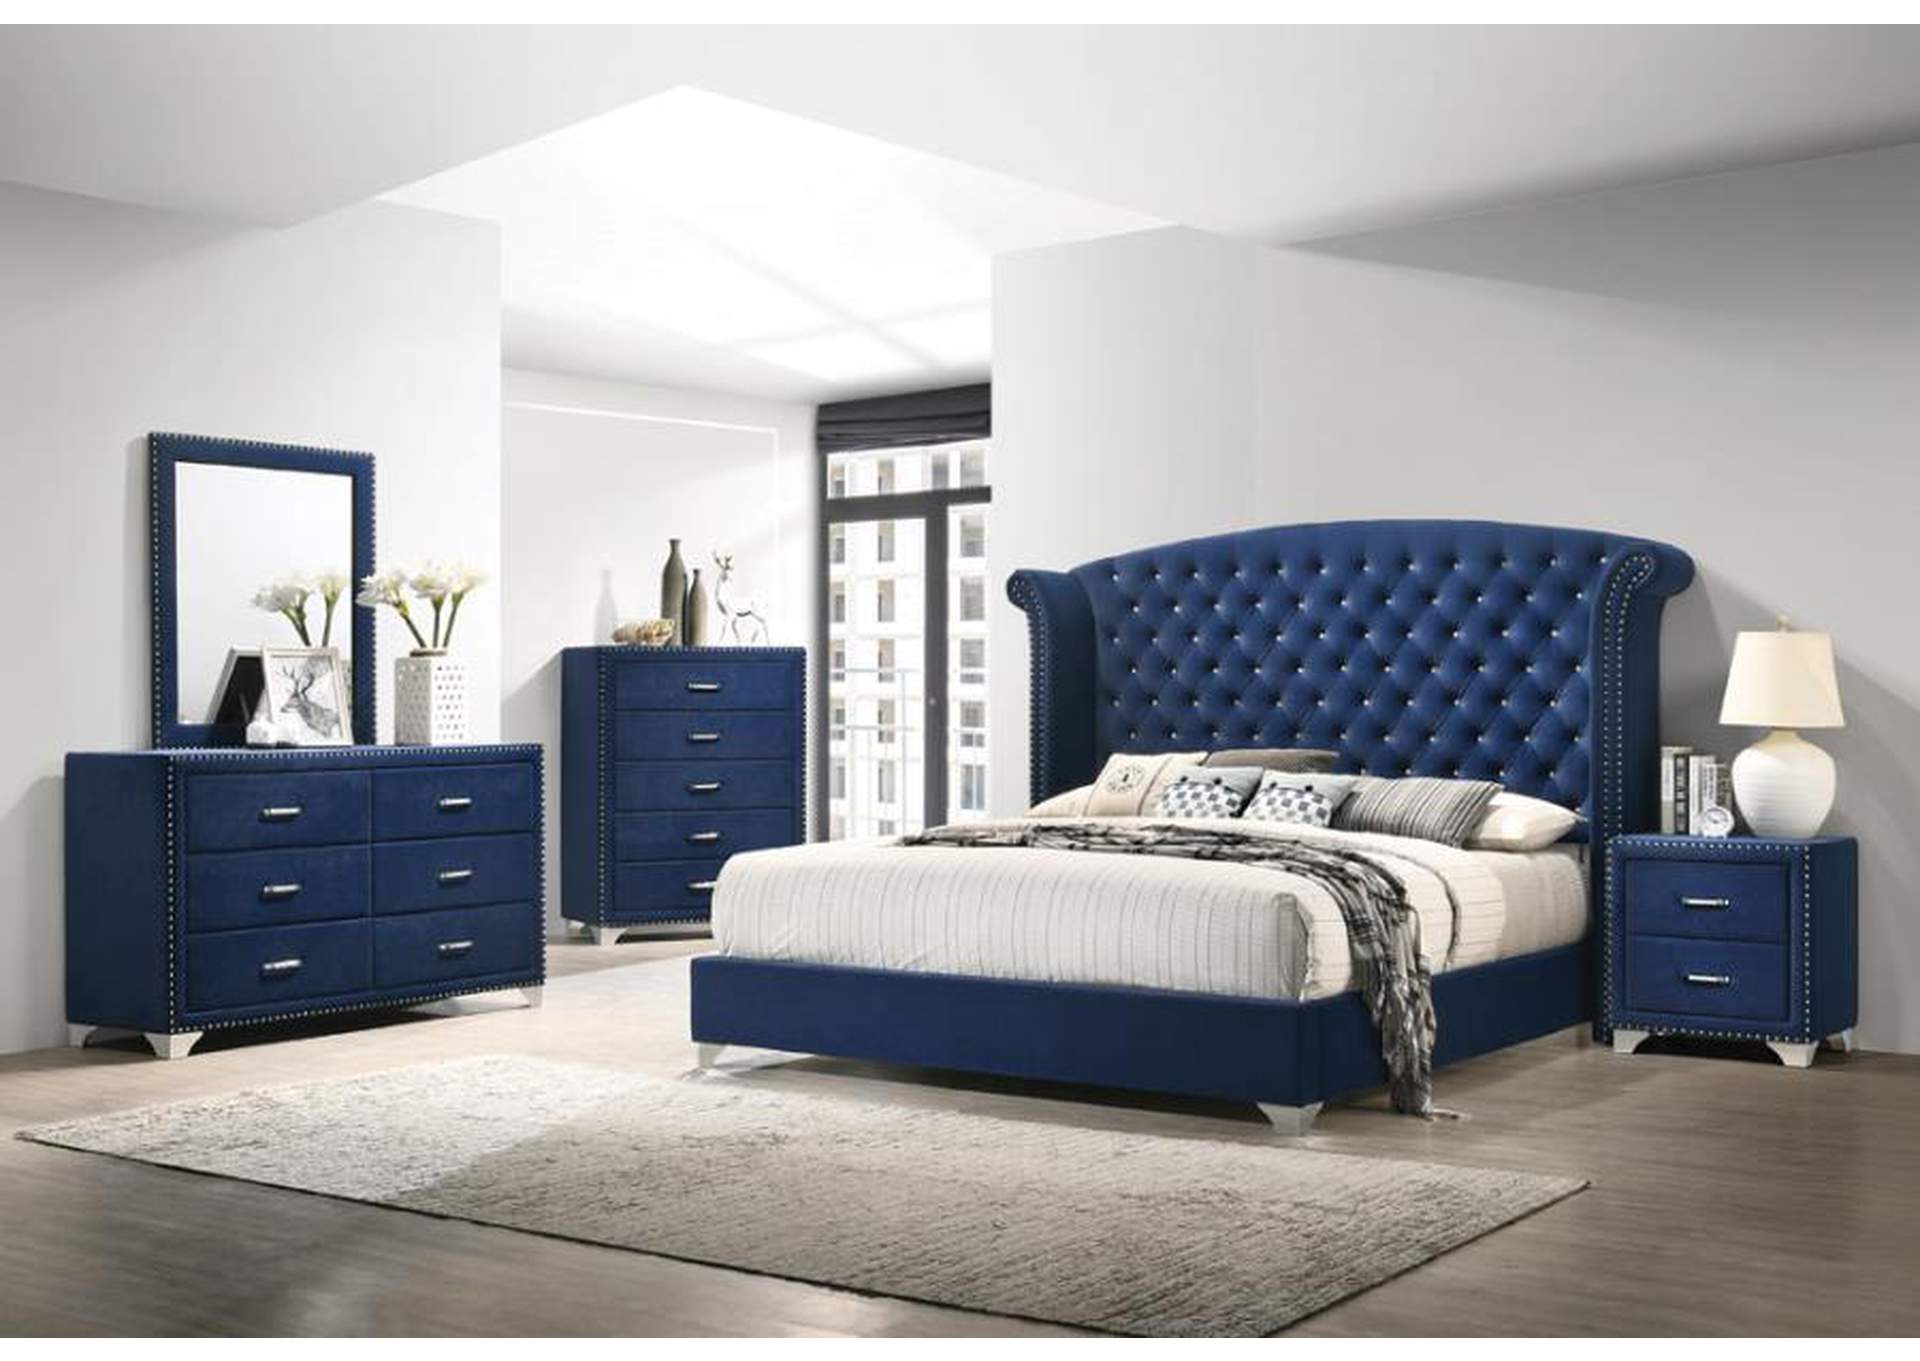 Melody 4-Piece Queen Tufted Upholstered Bedroom Set Pacific Blue,Coaster Furniture